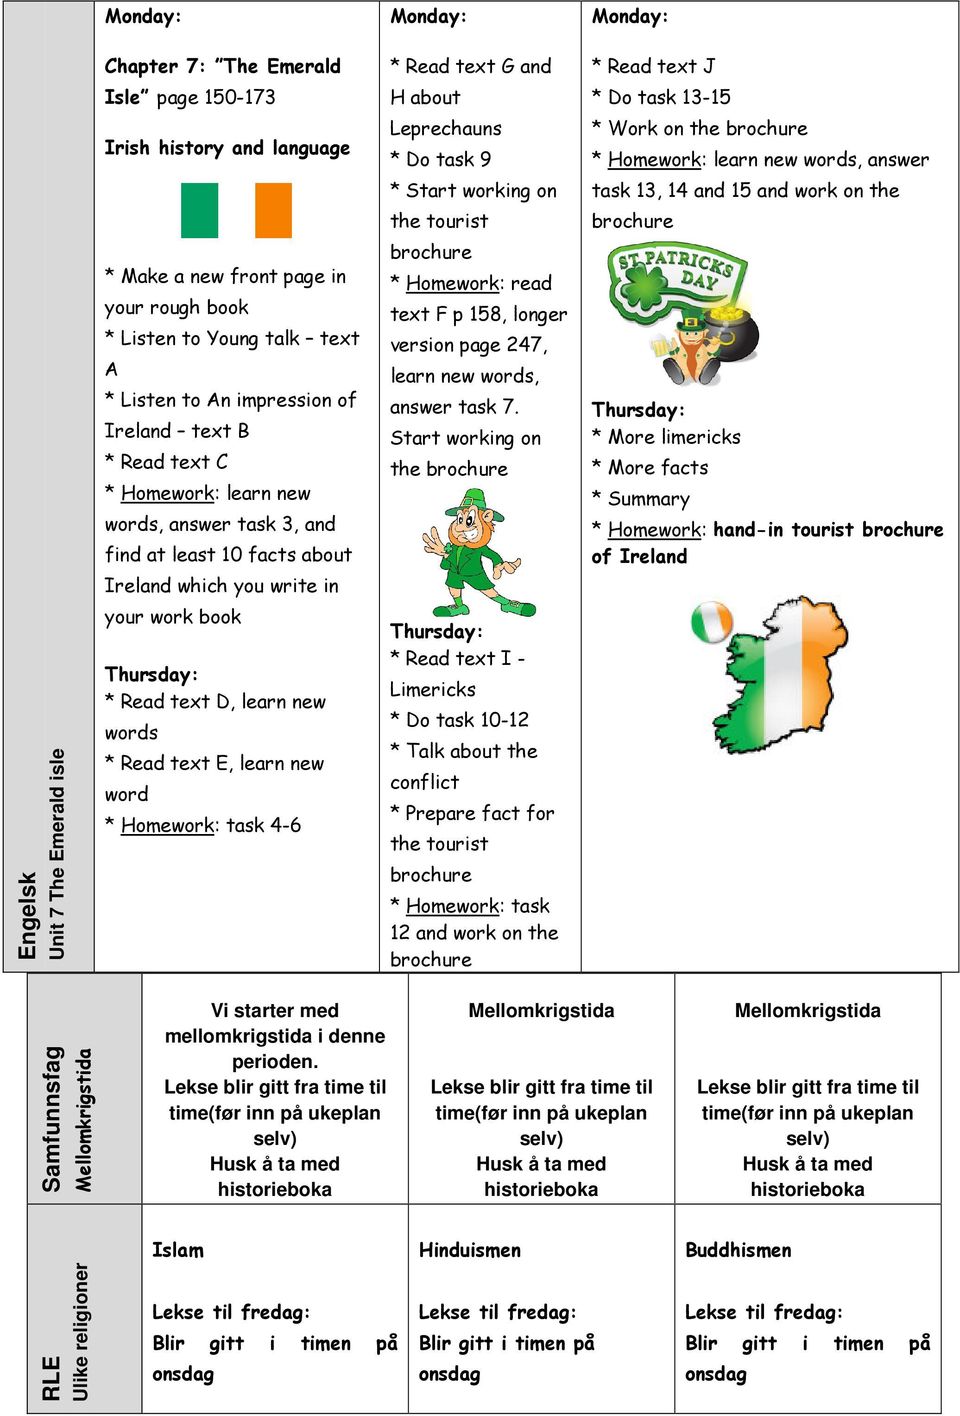 text B * Read text C * Homework: learn new words, answer task 3, and find at least 10 facts about Ireland which you write in * Homework: read text F p 158, longer version page 247, learn new words,